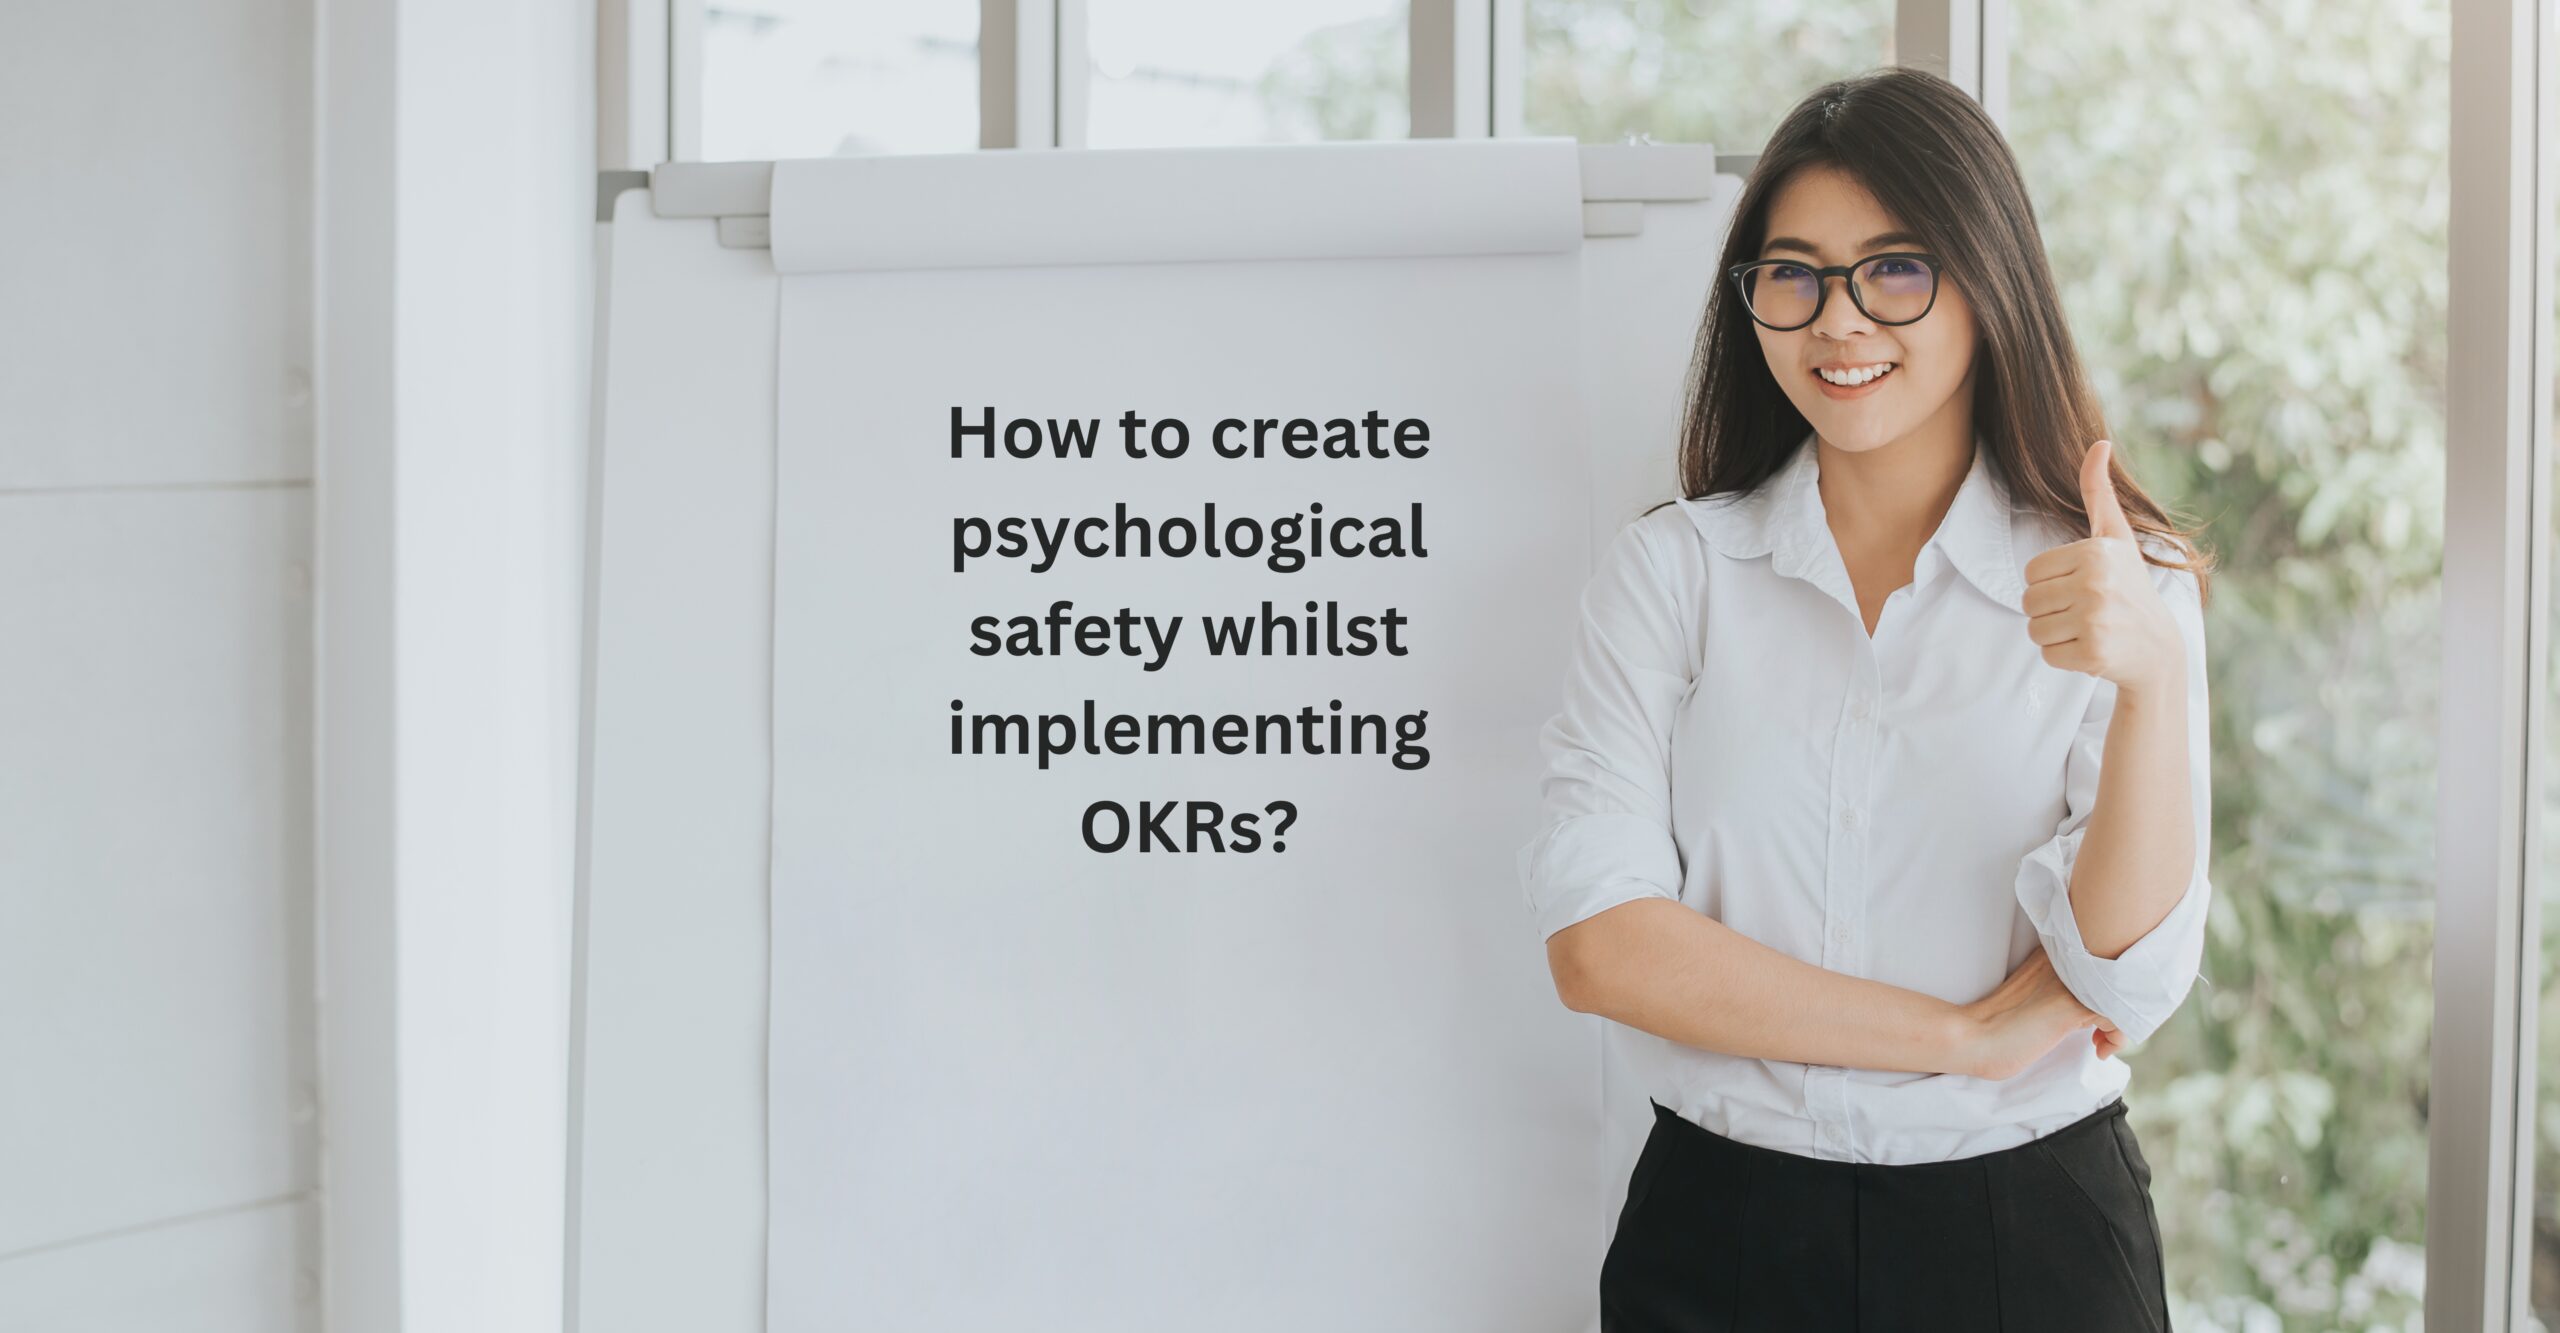 How to create psychological safety whilst implementing OKRs